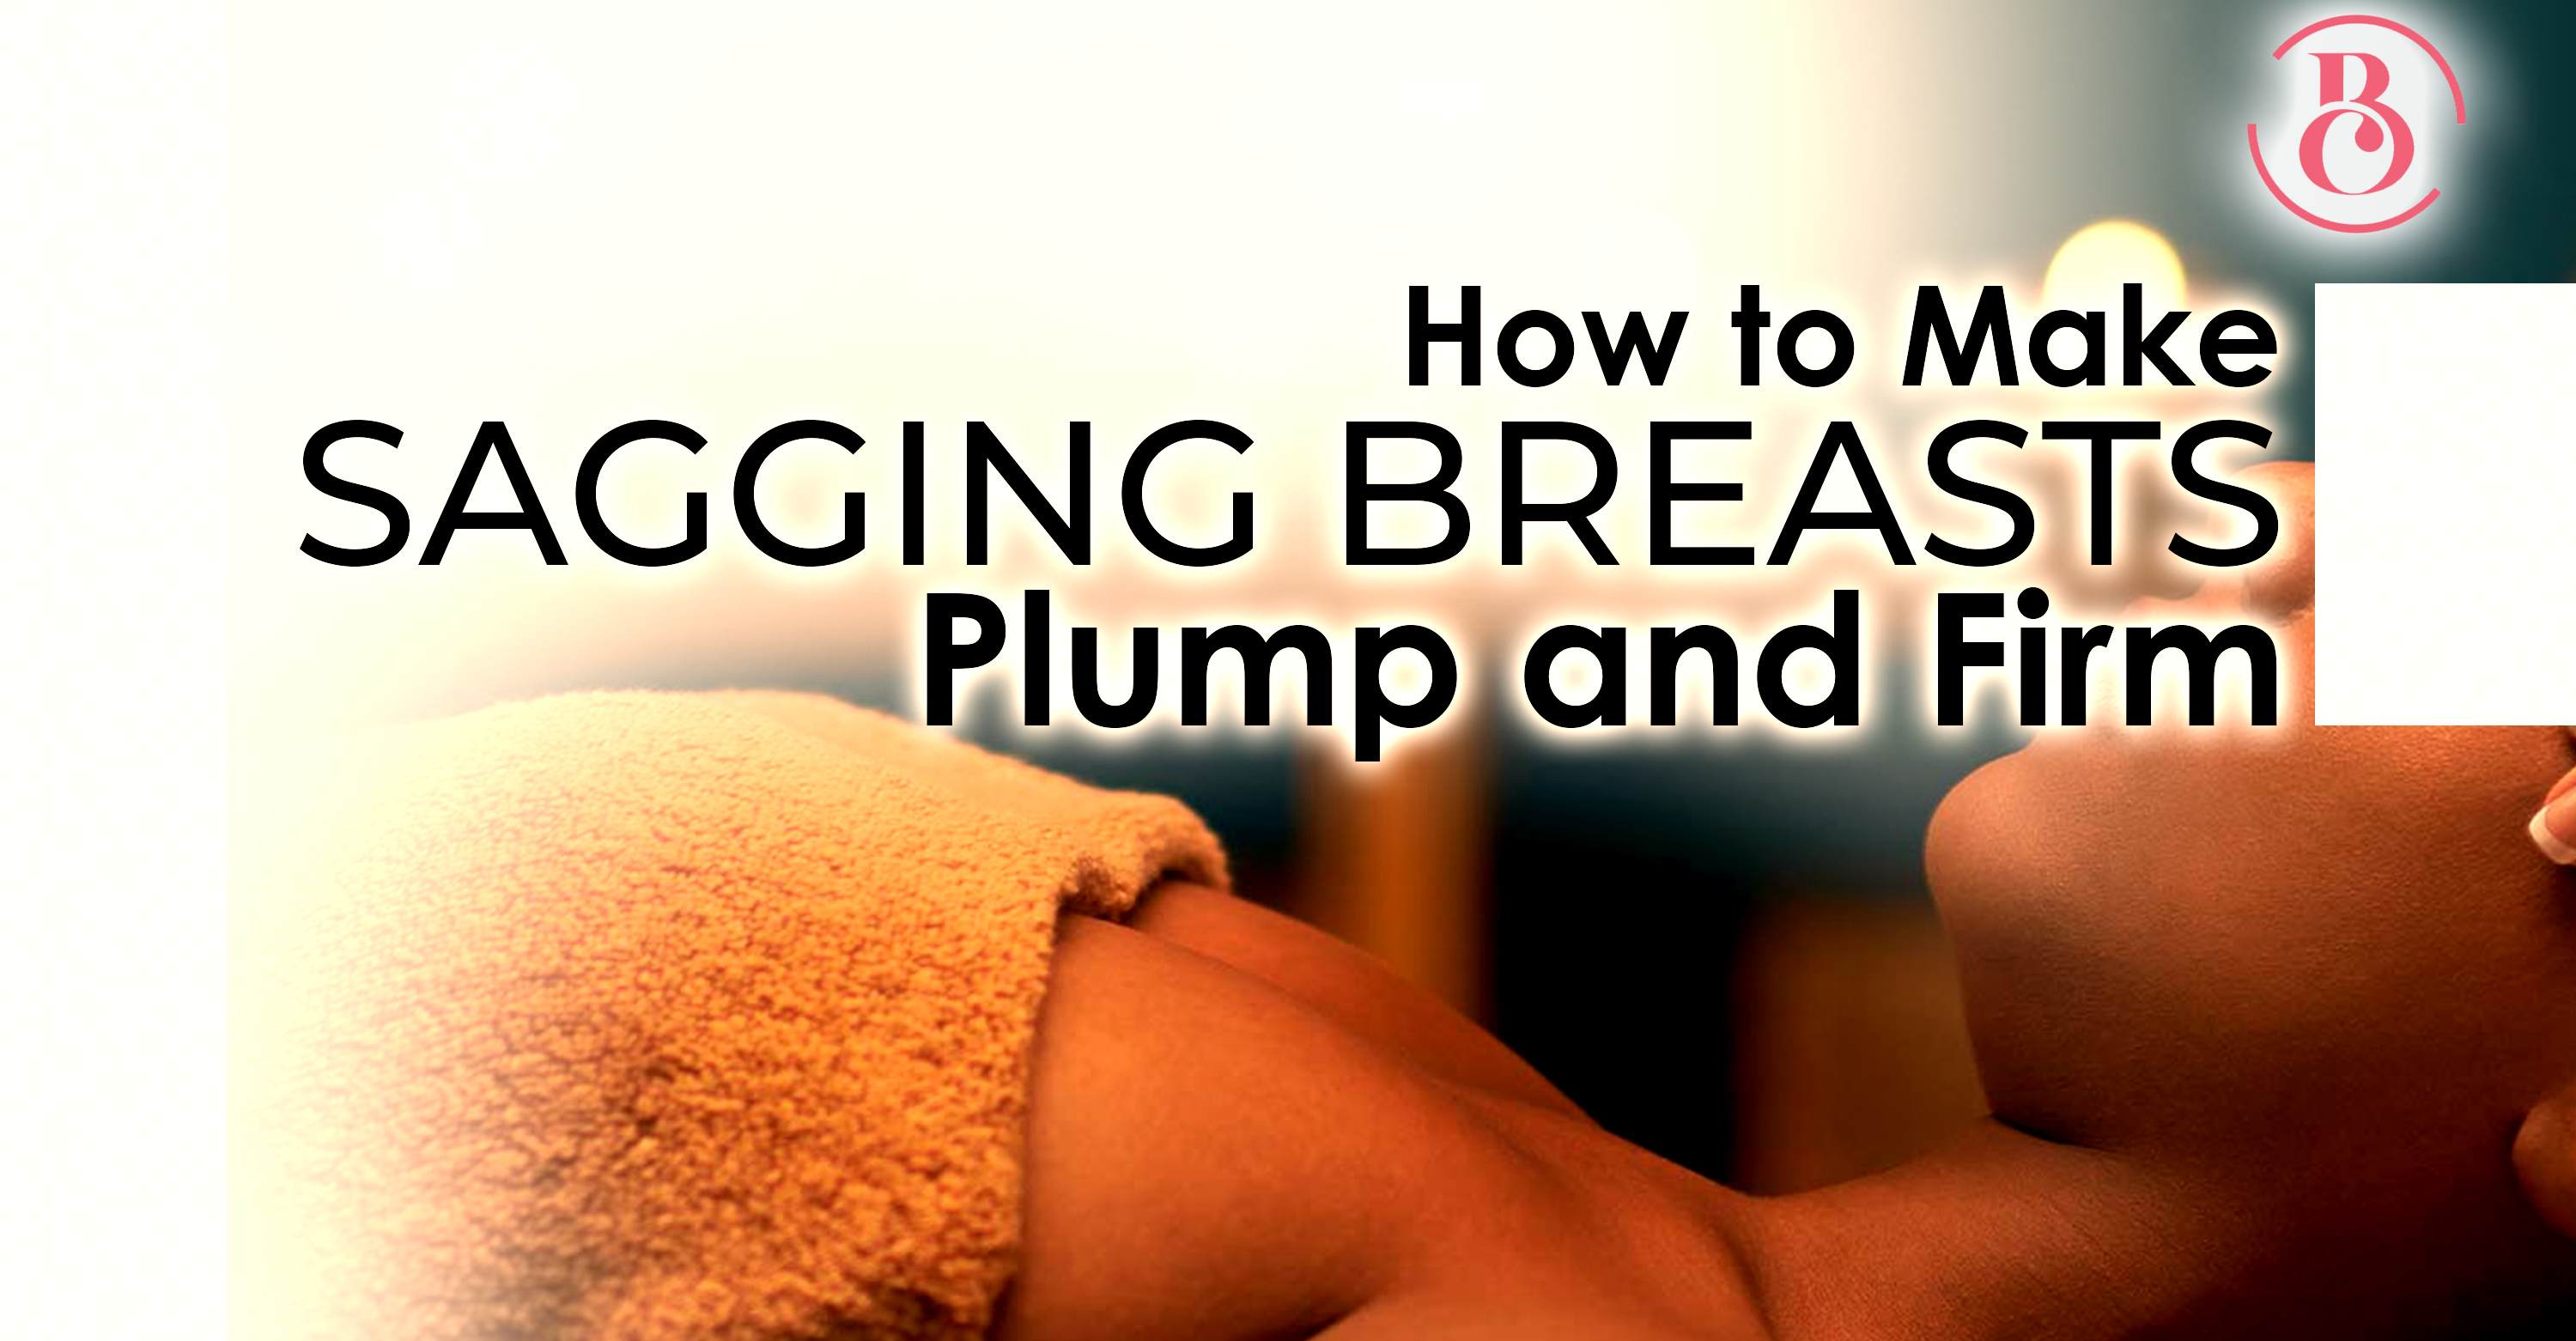 Tired of Those Sagging Breasts? 6 Ways to Make Them Plump and Firm